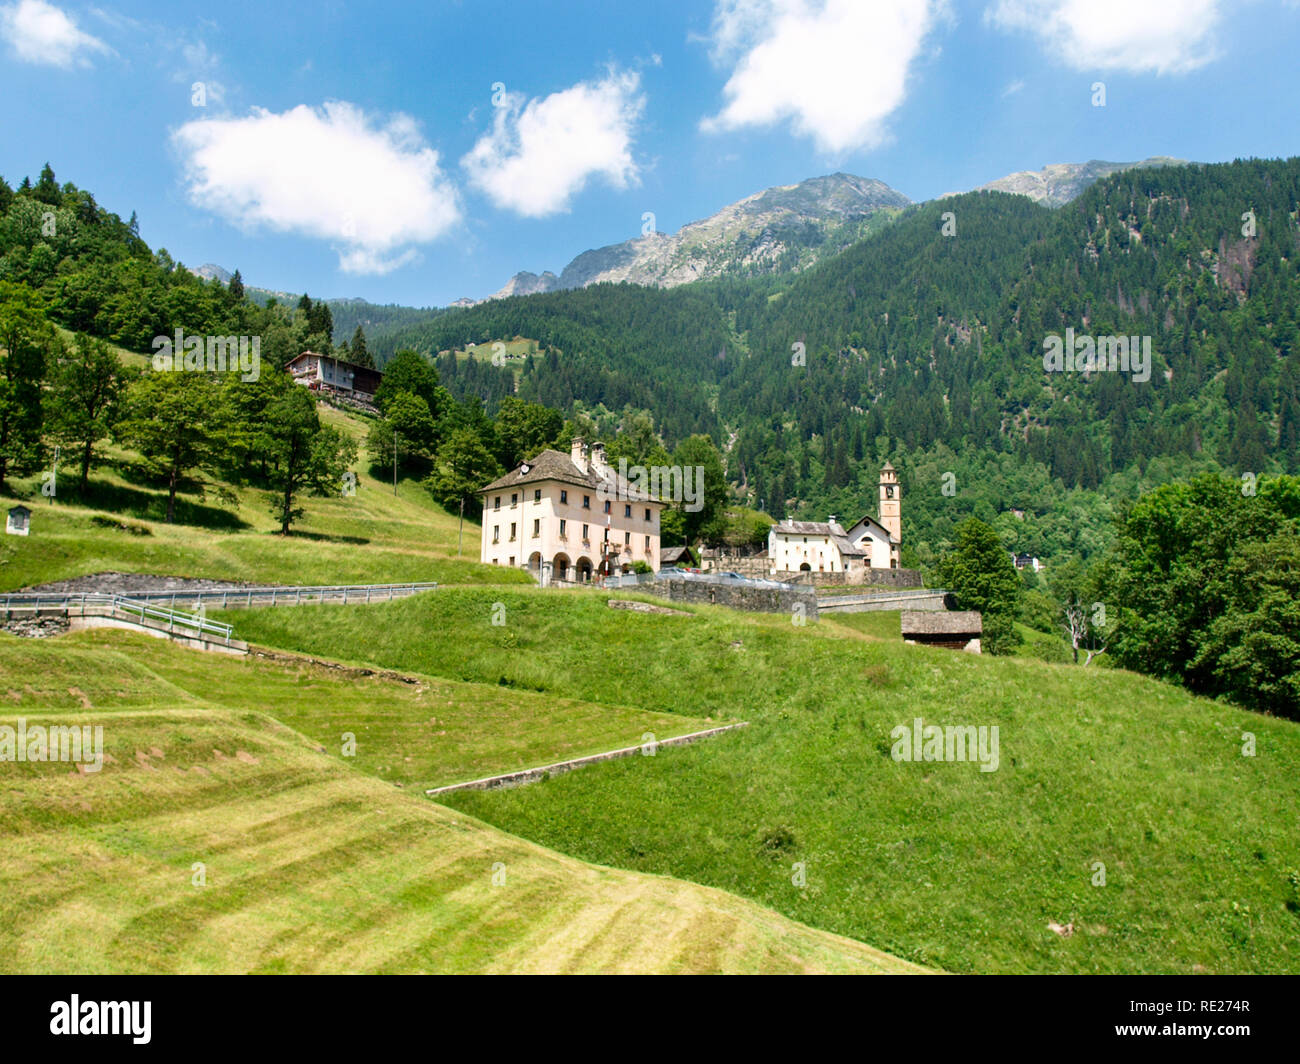 Vallemaggia, Switzerland: Images of the typical Ticino valley. Stock Photo